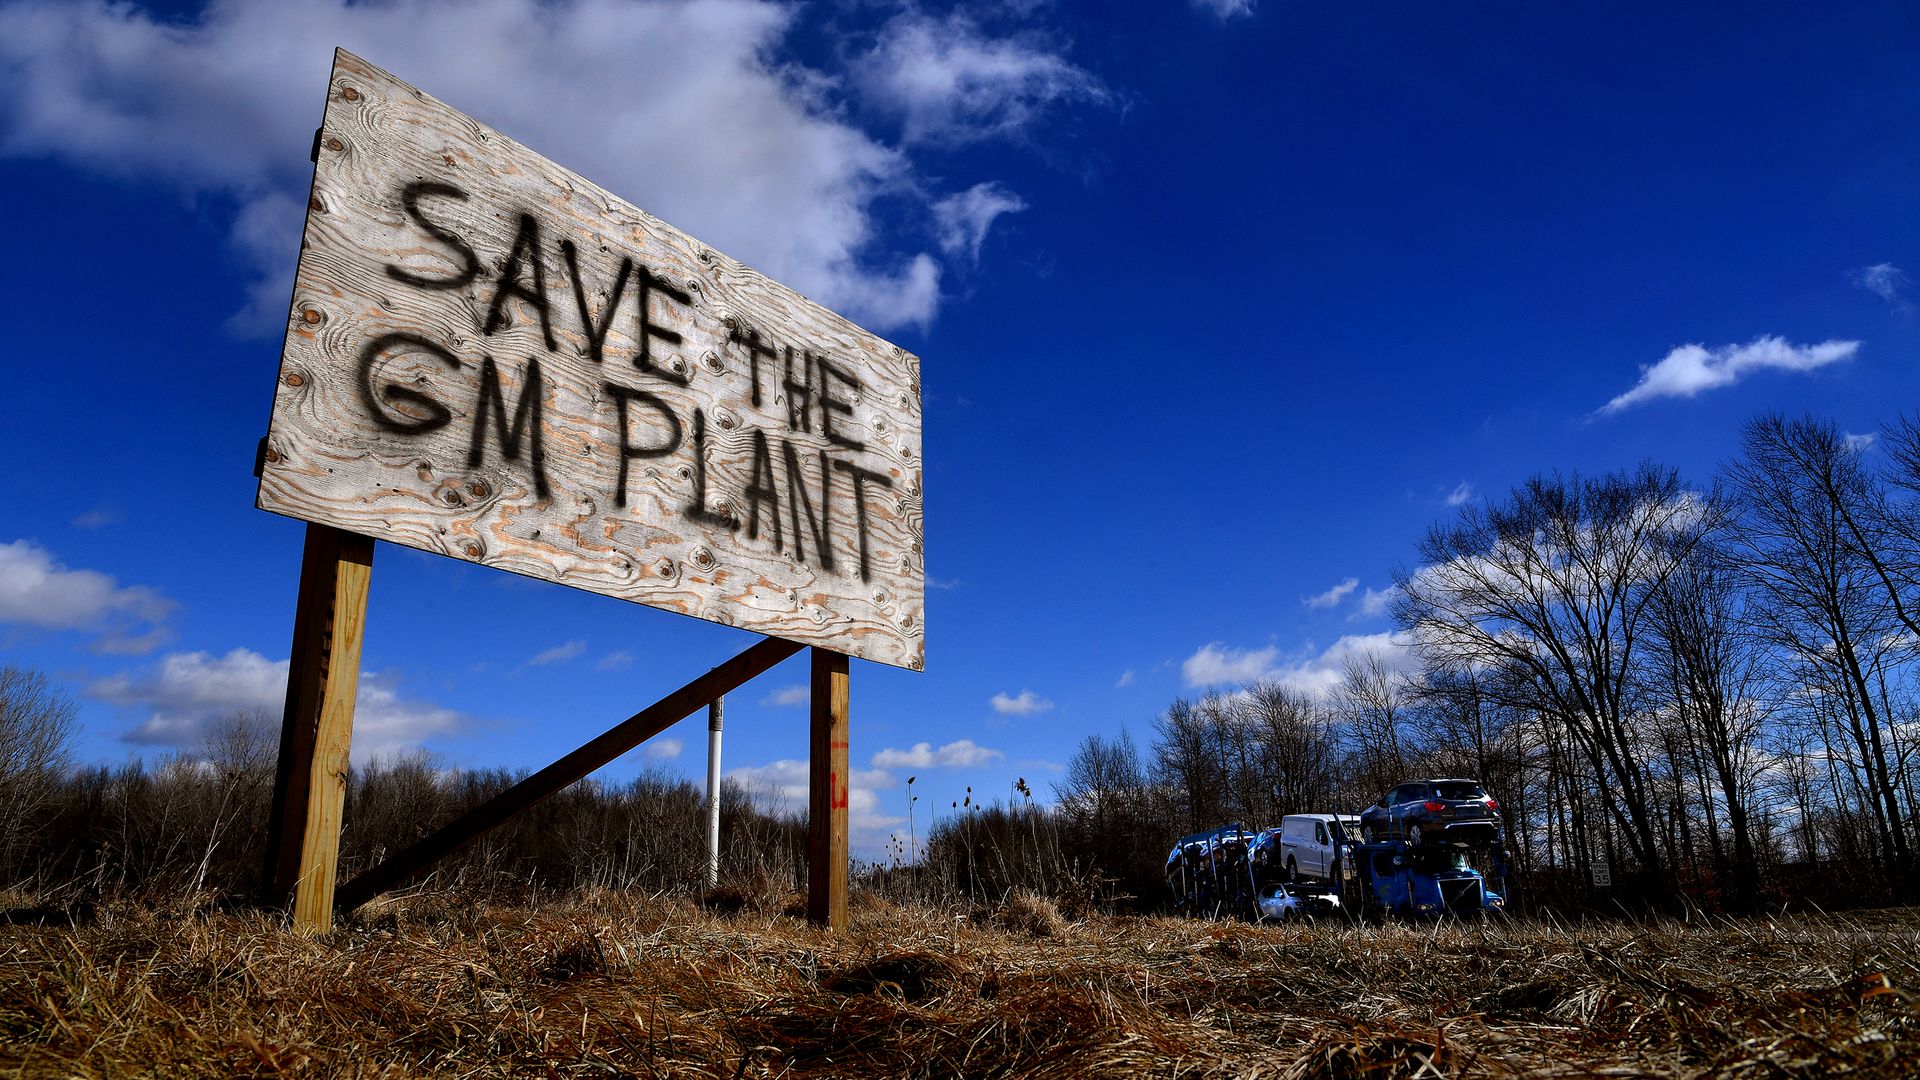 In this image, a wooden sign in a field reads "Save the GM plant"